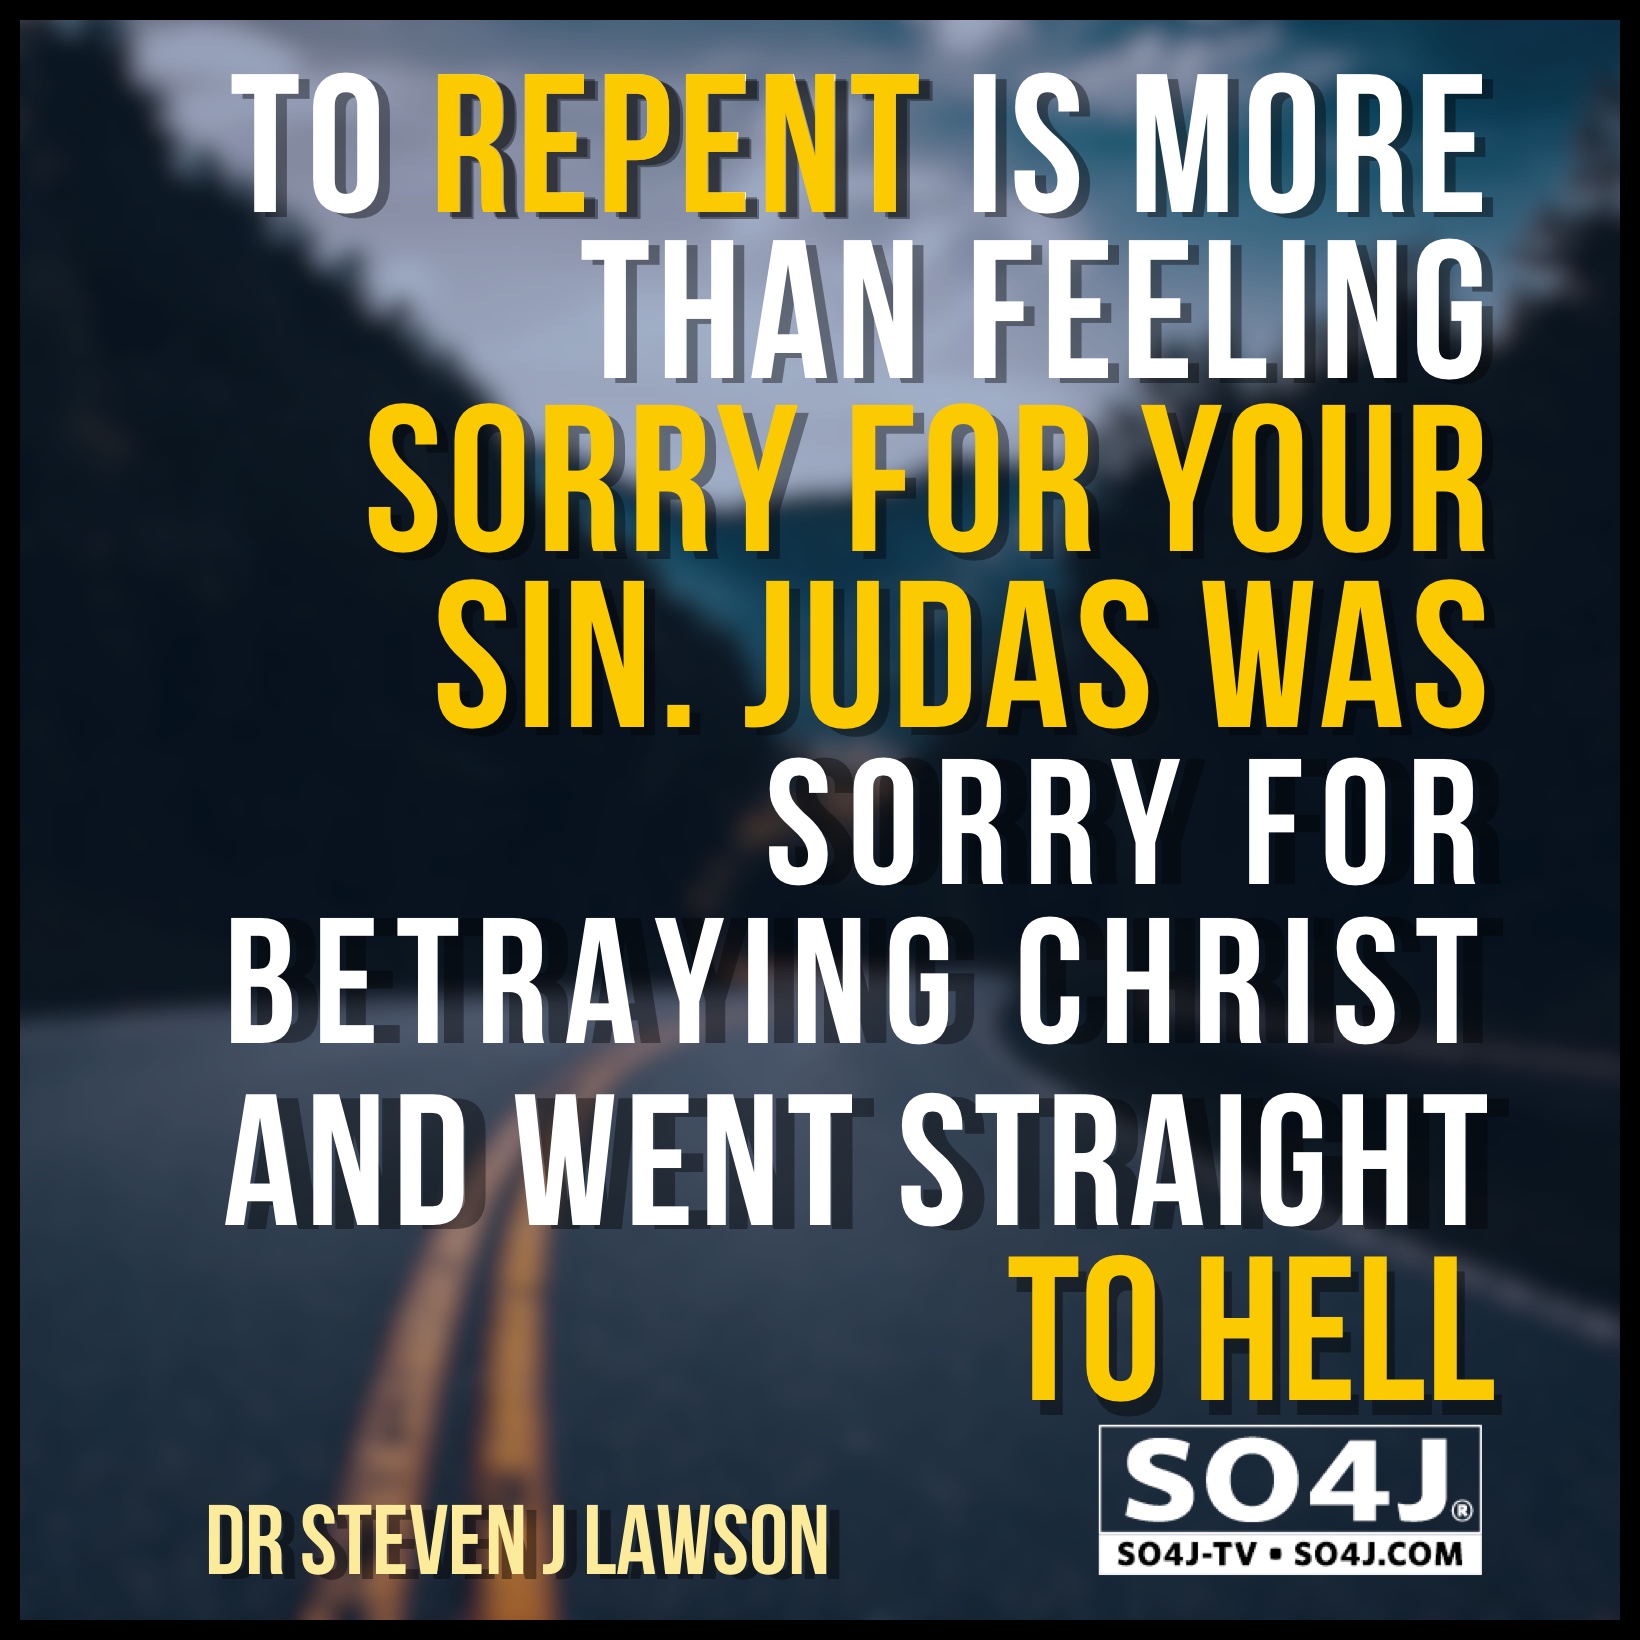 Quote by Steve Lawson: "To Repent is More than Feeling Sorry for your Sin. Judas was sorry for betraying Christ and went straight to Hell." SO4J-TV